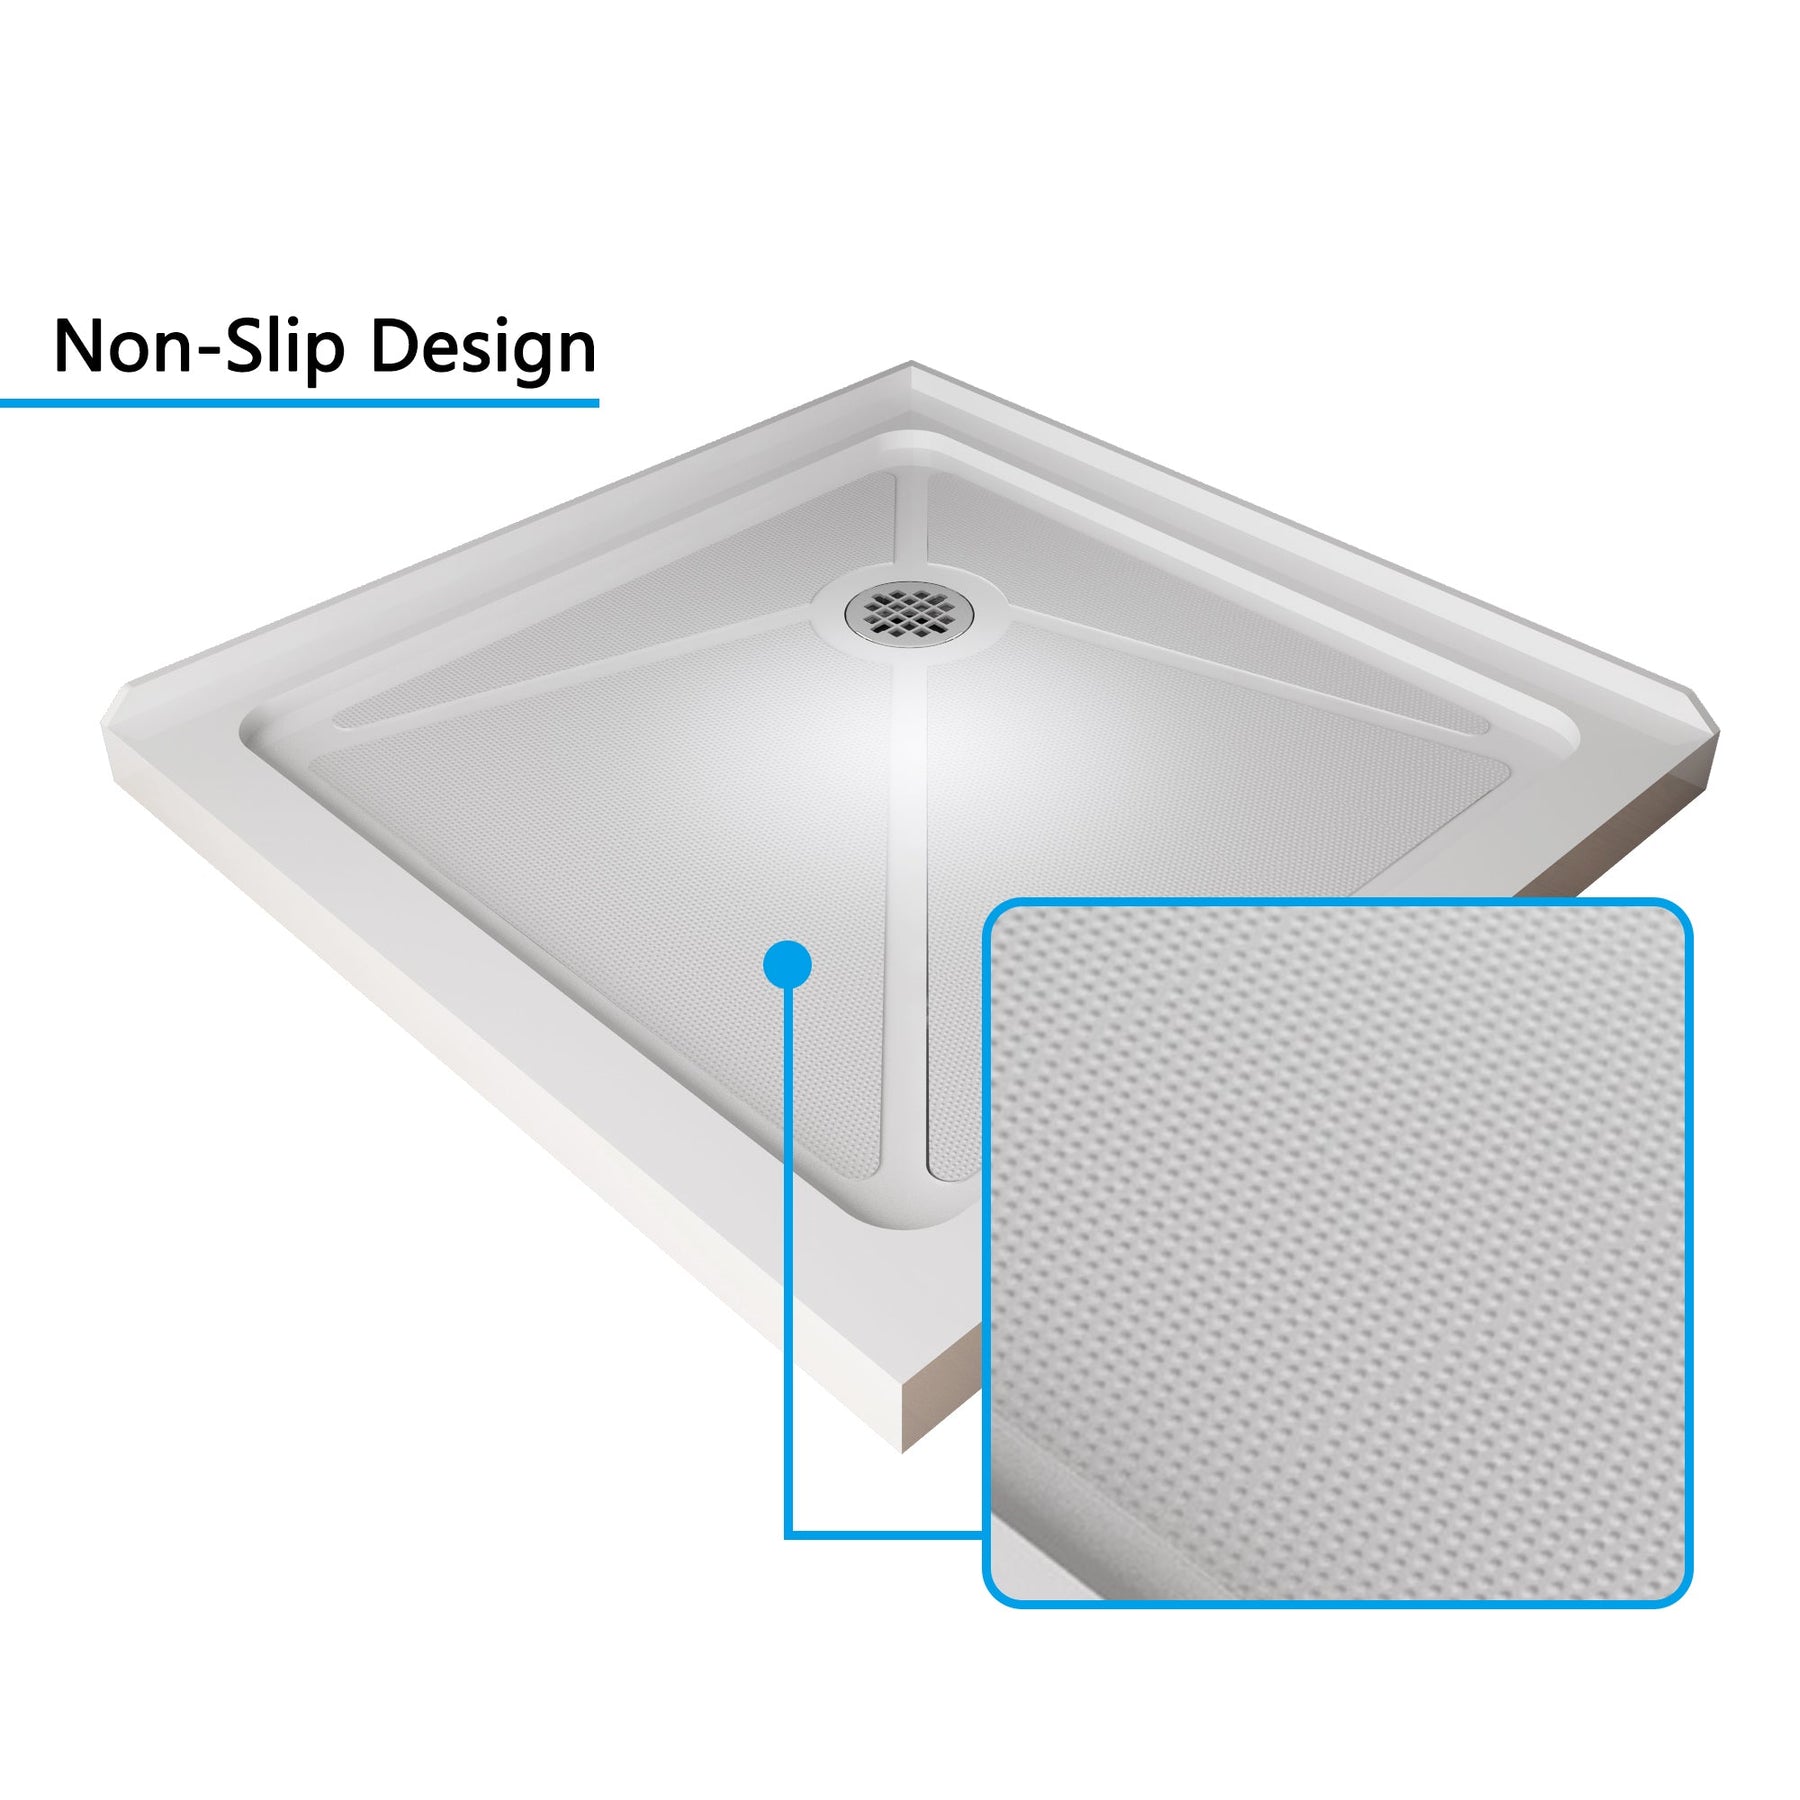 SL4U SHOWER Acrylic Shower Base for 36 x 36 Shower Enclosure Corner Shower Drain Included, 36" x 36" x 3" Shower Tray Base, White Color.